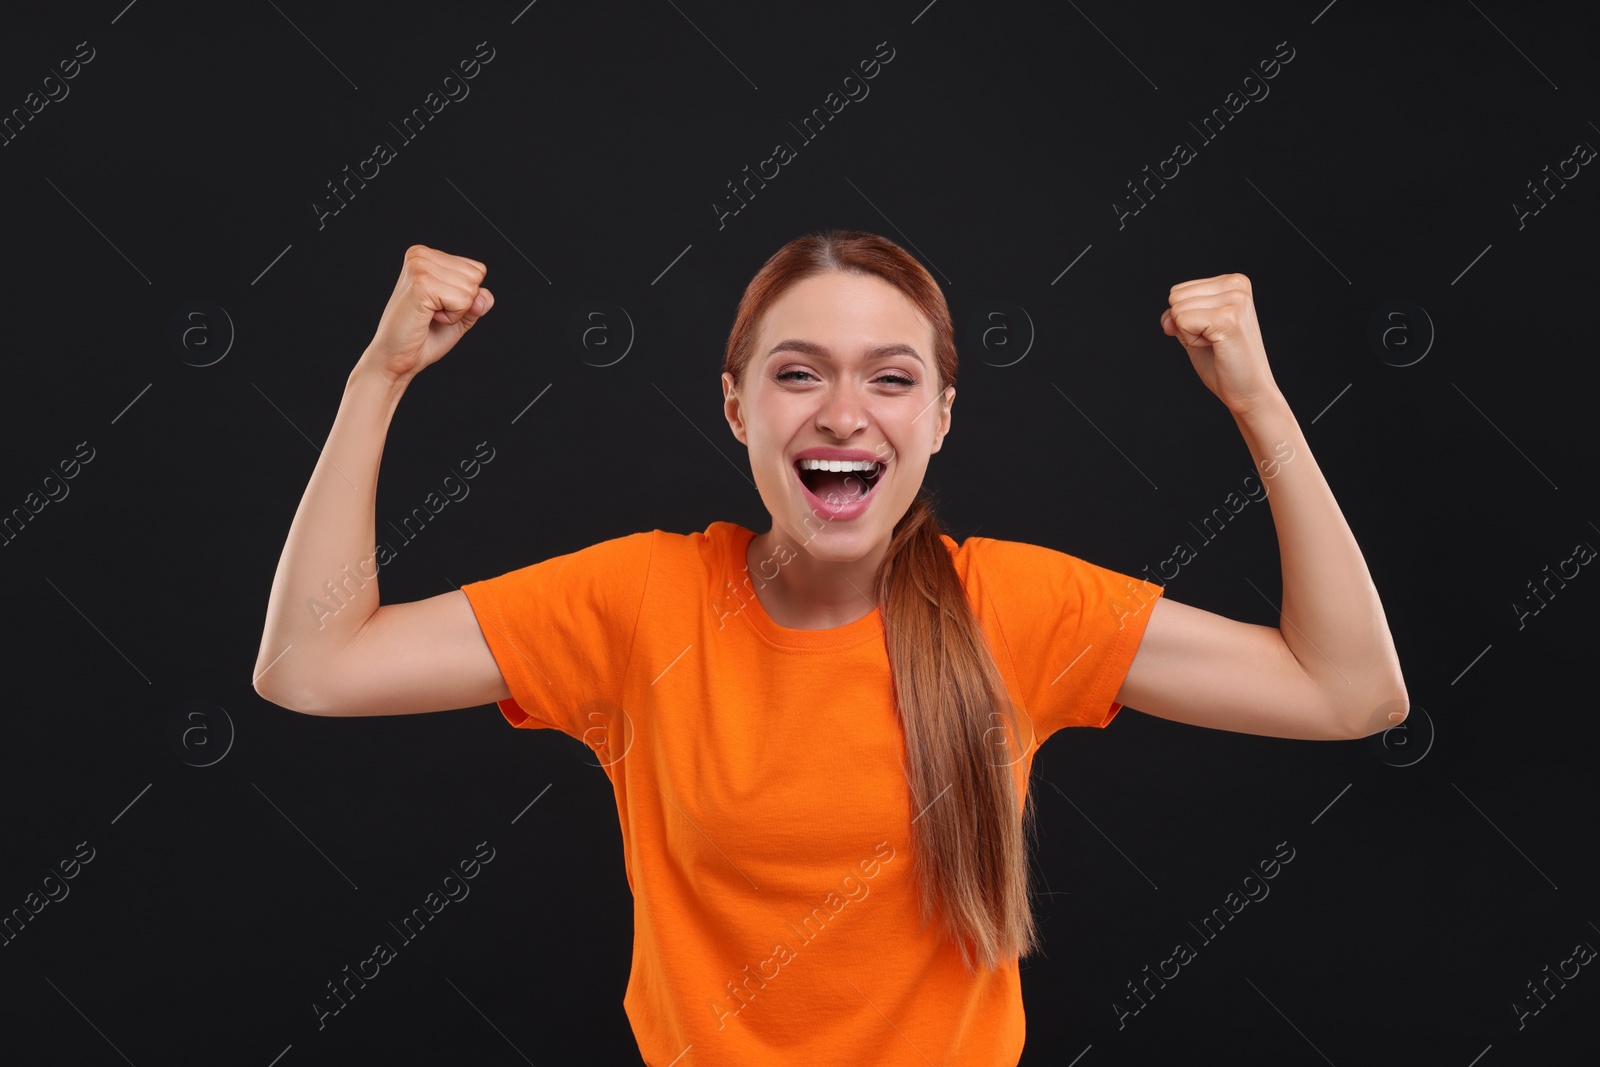 Photo of Excited sports fan in orange t-shirt on black background